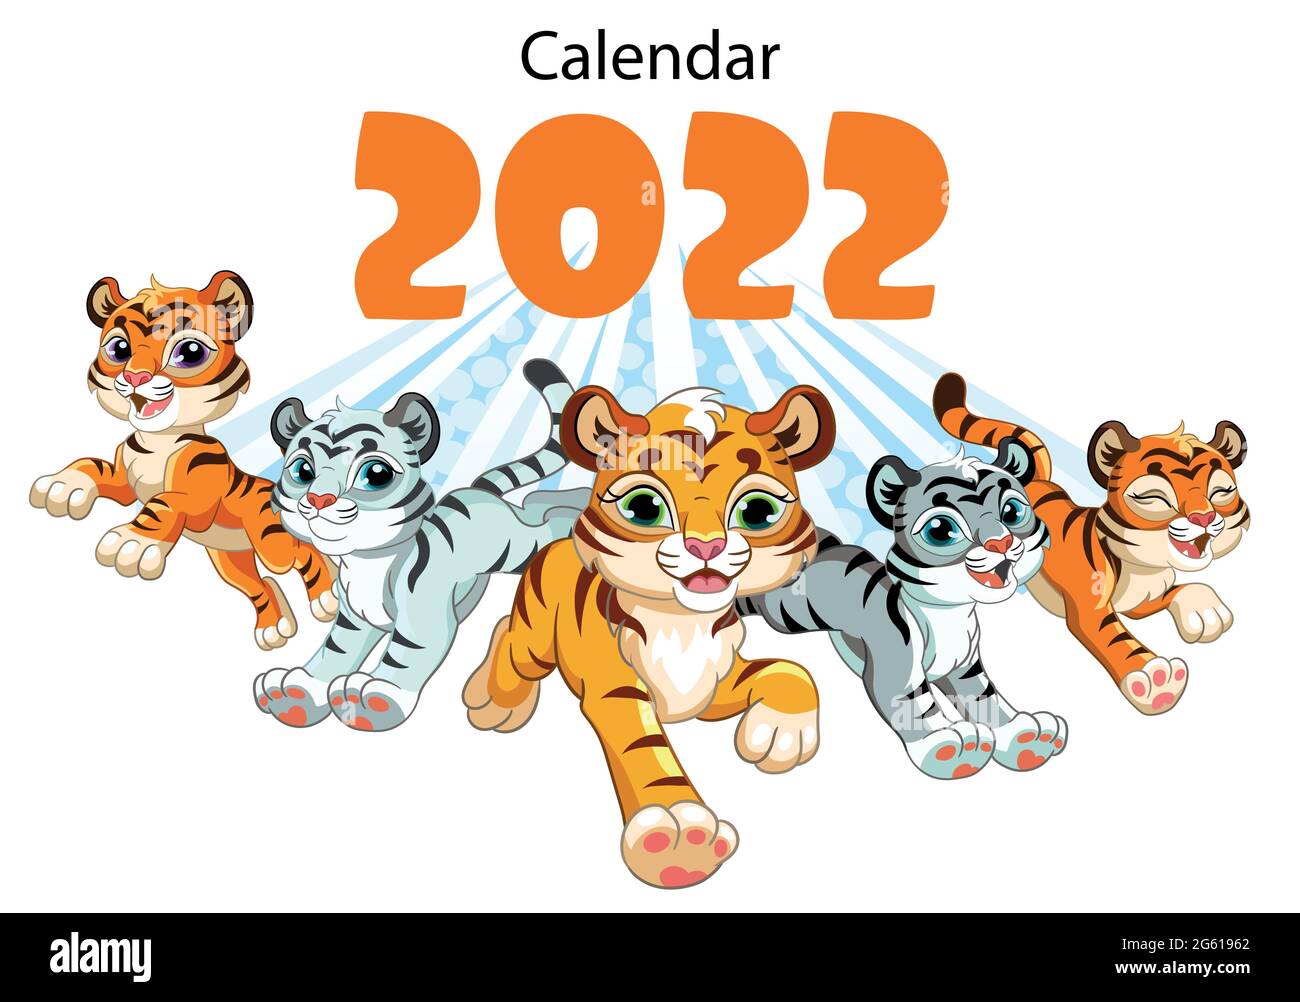 Horizontal desktop childrens calendar cover design for 2022, the year of the Tiger in the Chinese calendar. Cute running tiger characters. Vector illu Stock Vector